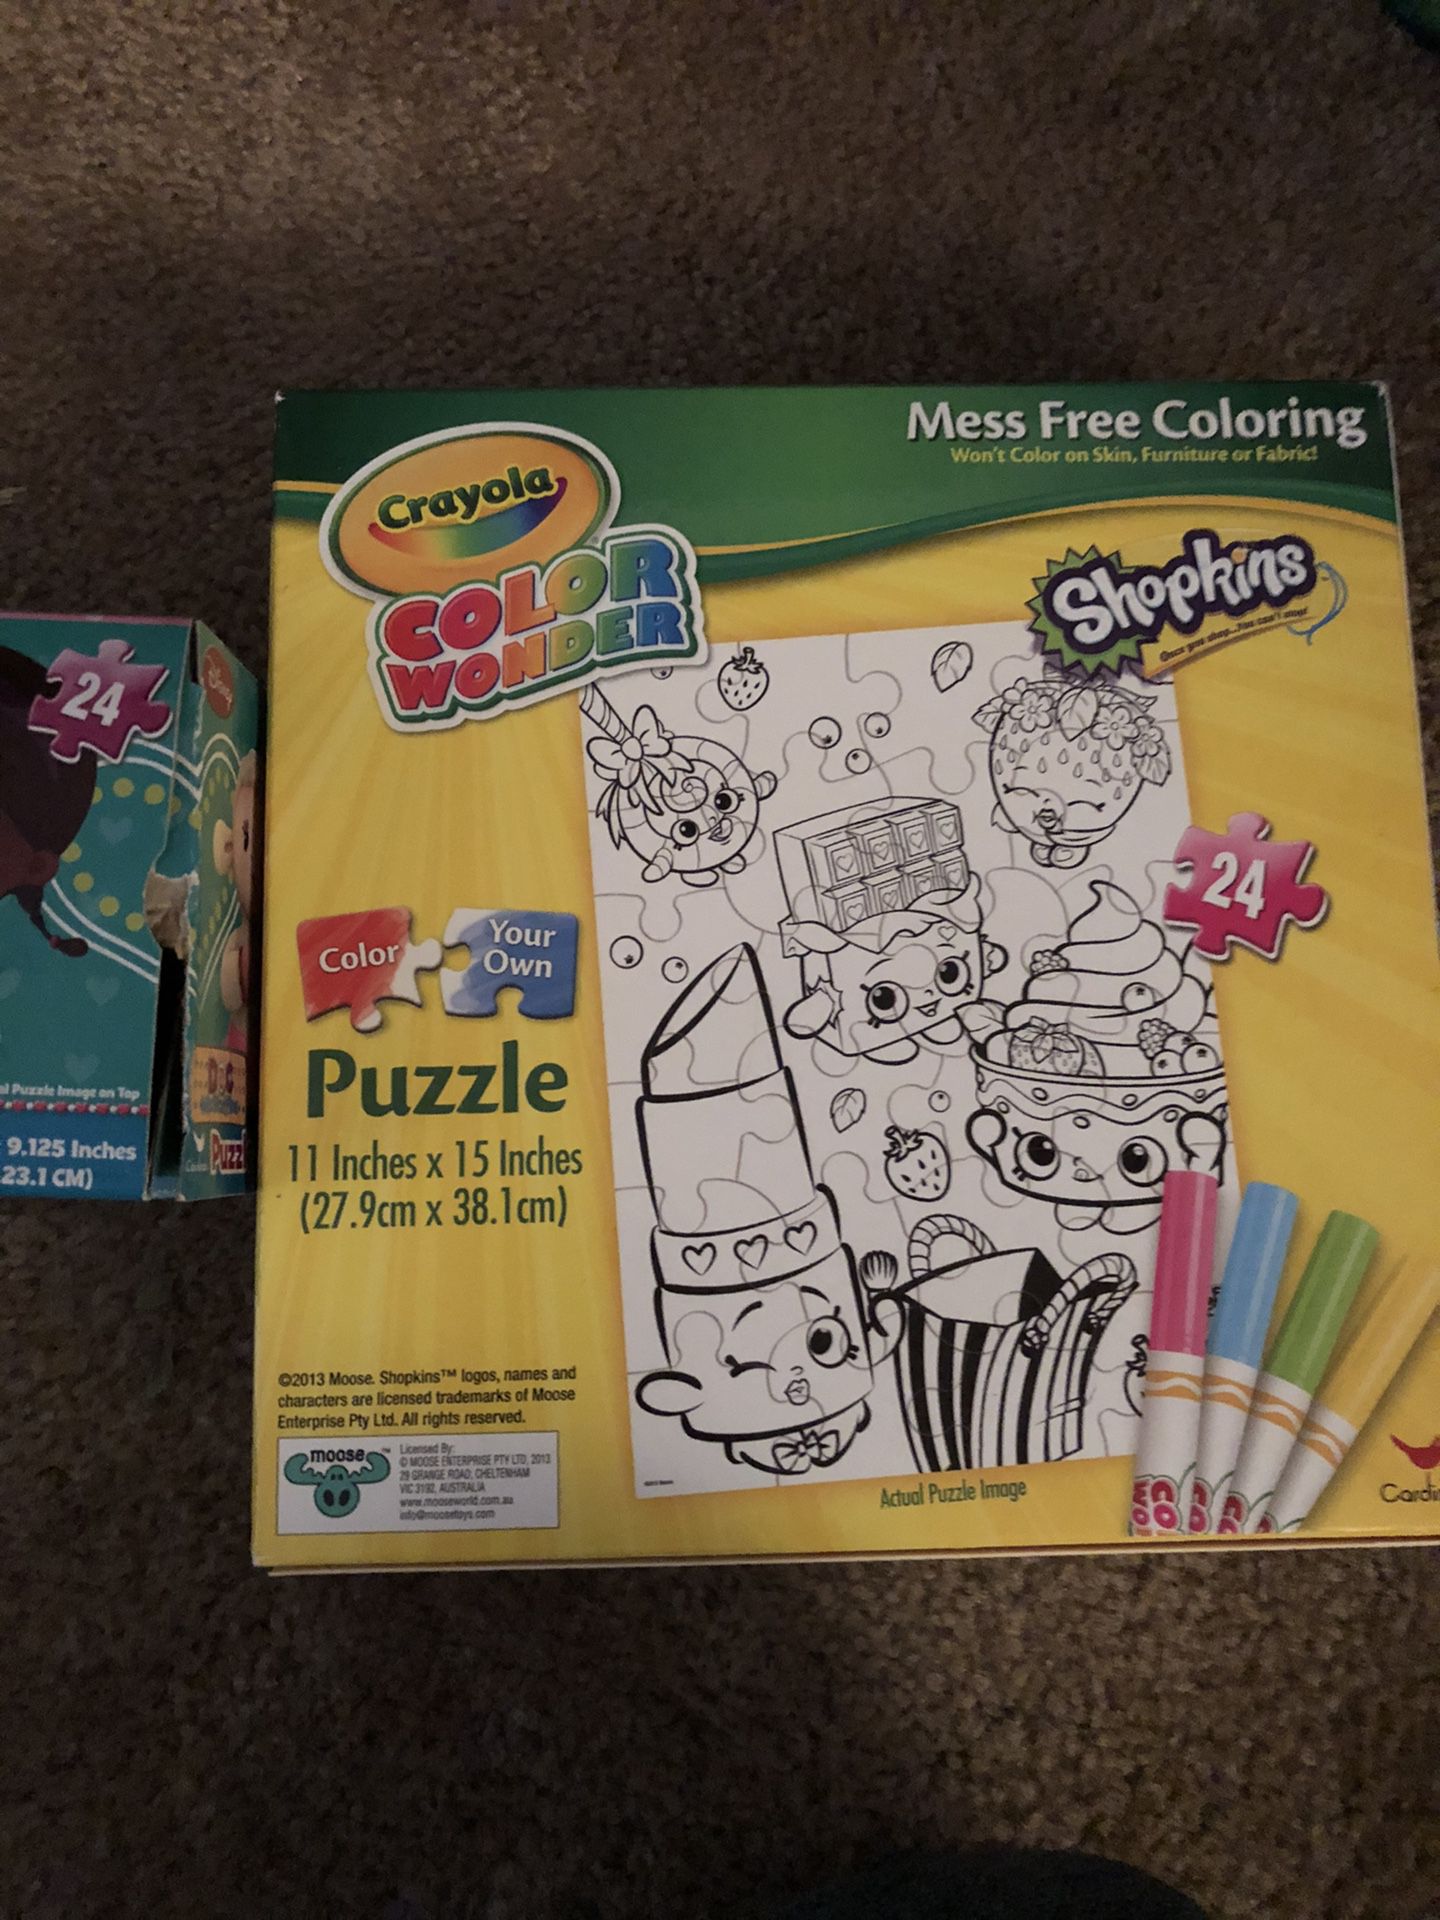 Shopkins mess free coloring by crayola plus puzzle